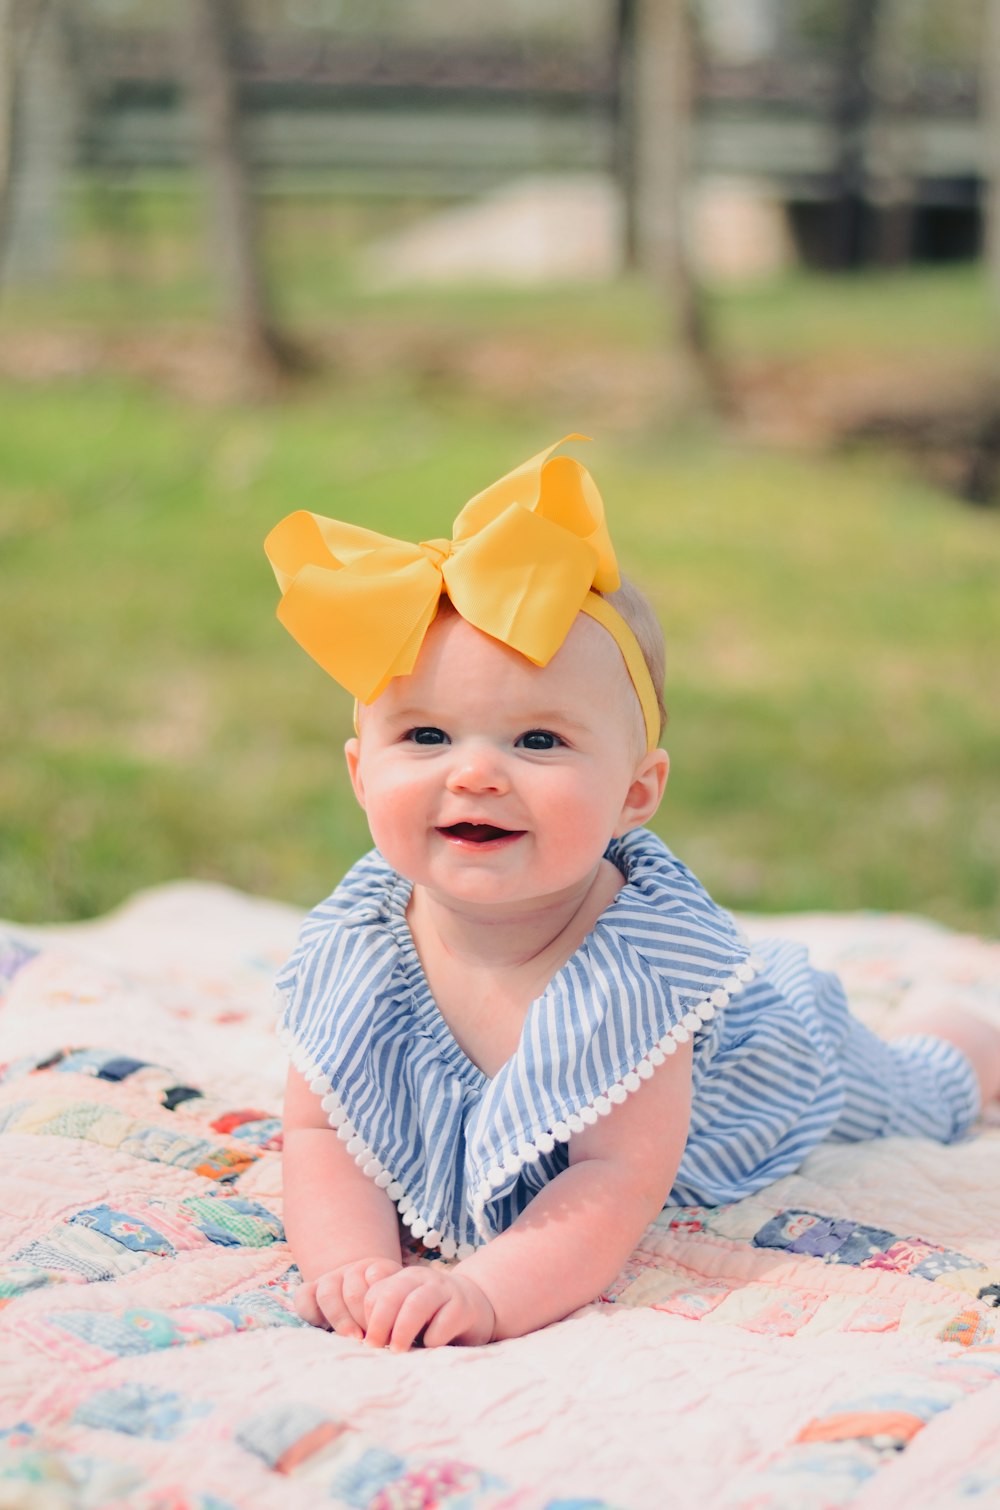 Girl Baby Pictures | Download Free Images on Unsplash